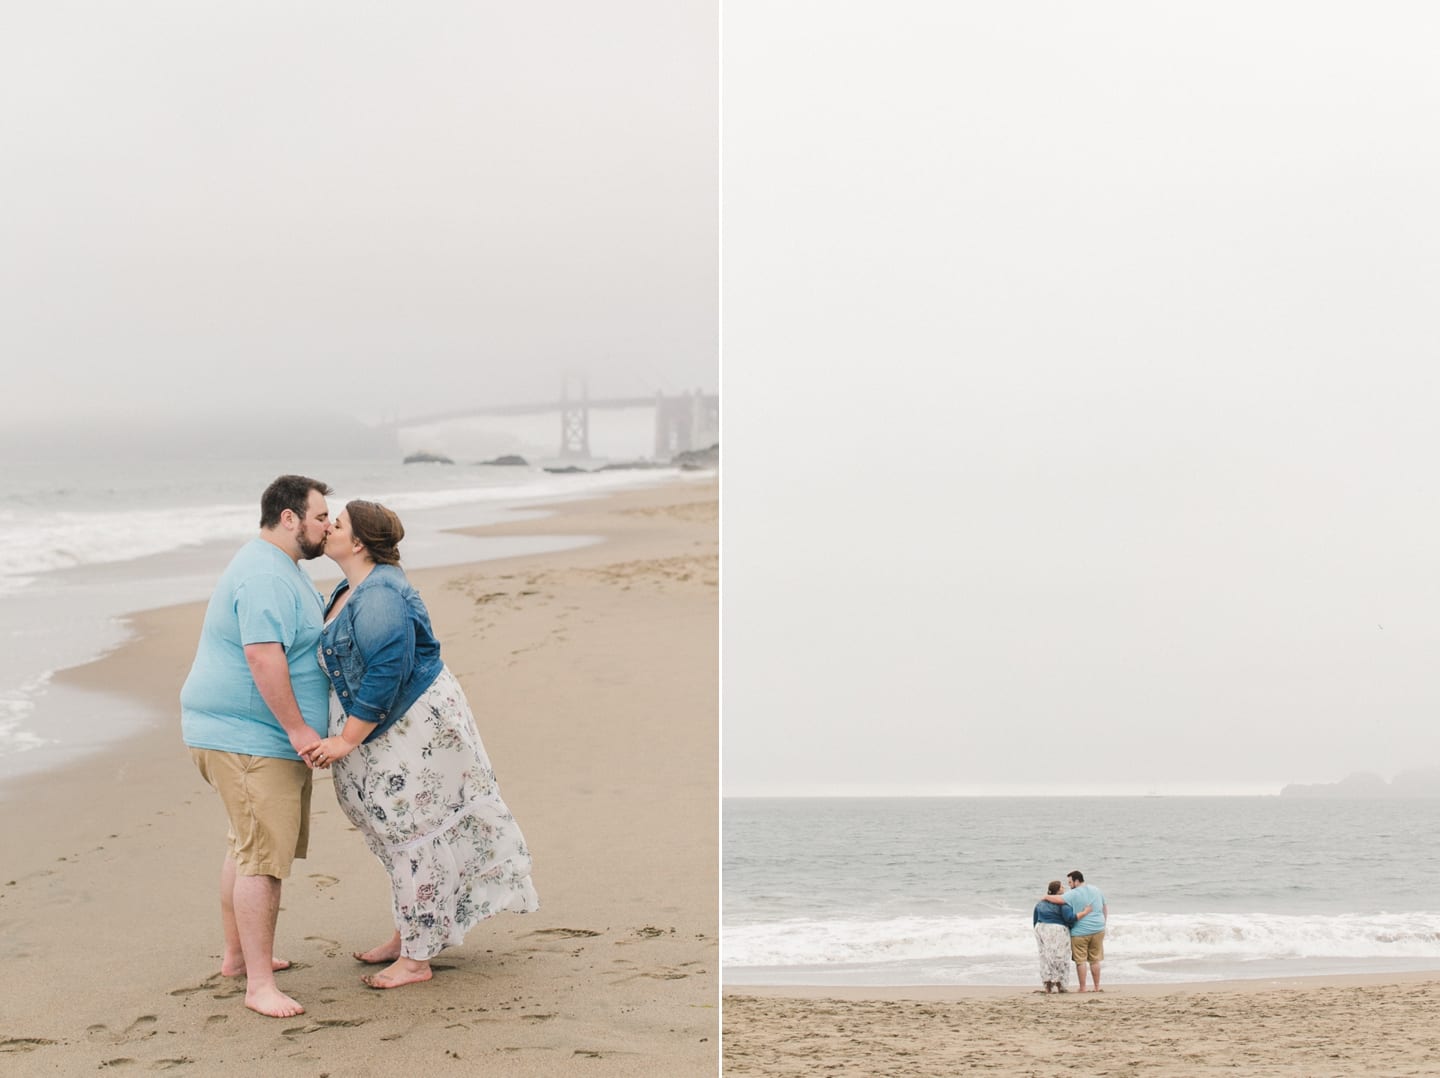 palace_of_fine_arts_bakers_beach_engagement_018.jpg